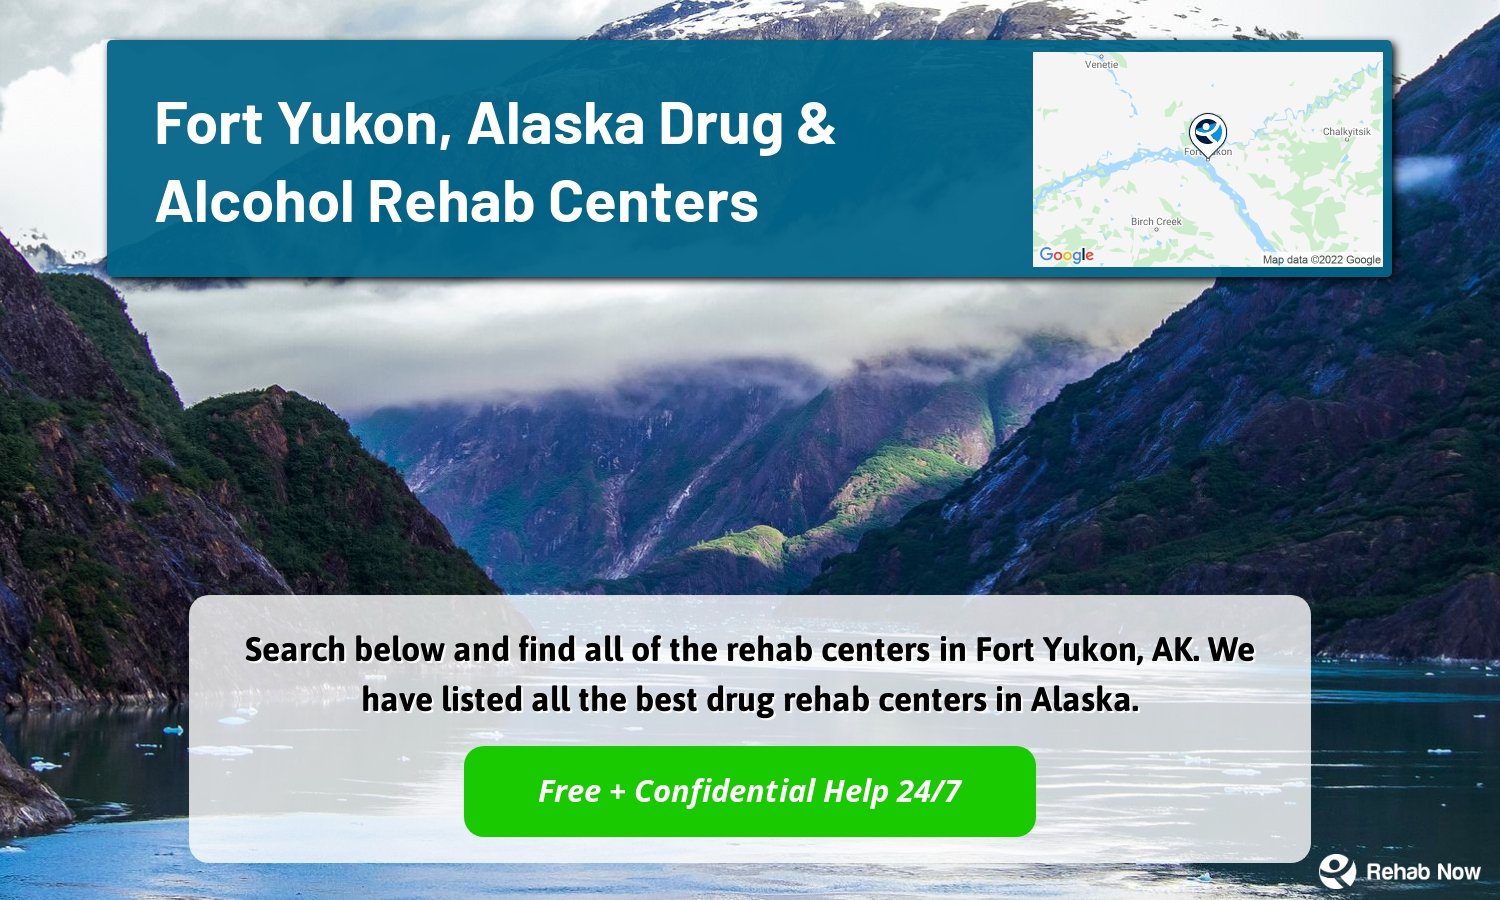 Search below and find all of the rehab centers in Fort Yukon, AK. We have listed all the best drug rehab centers in Alaska.